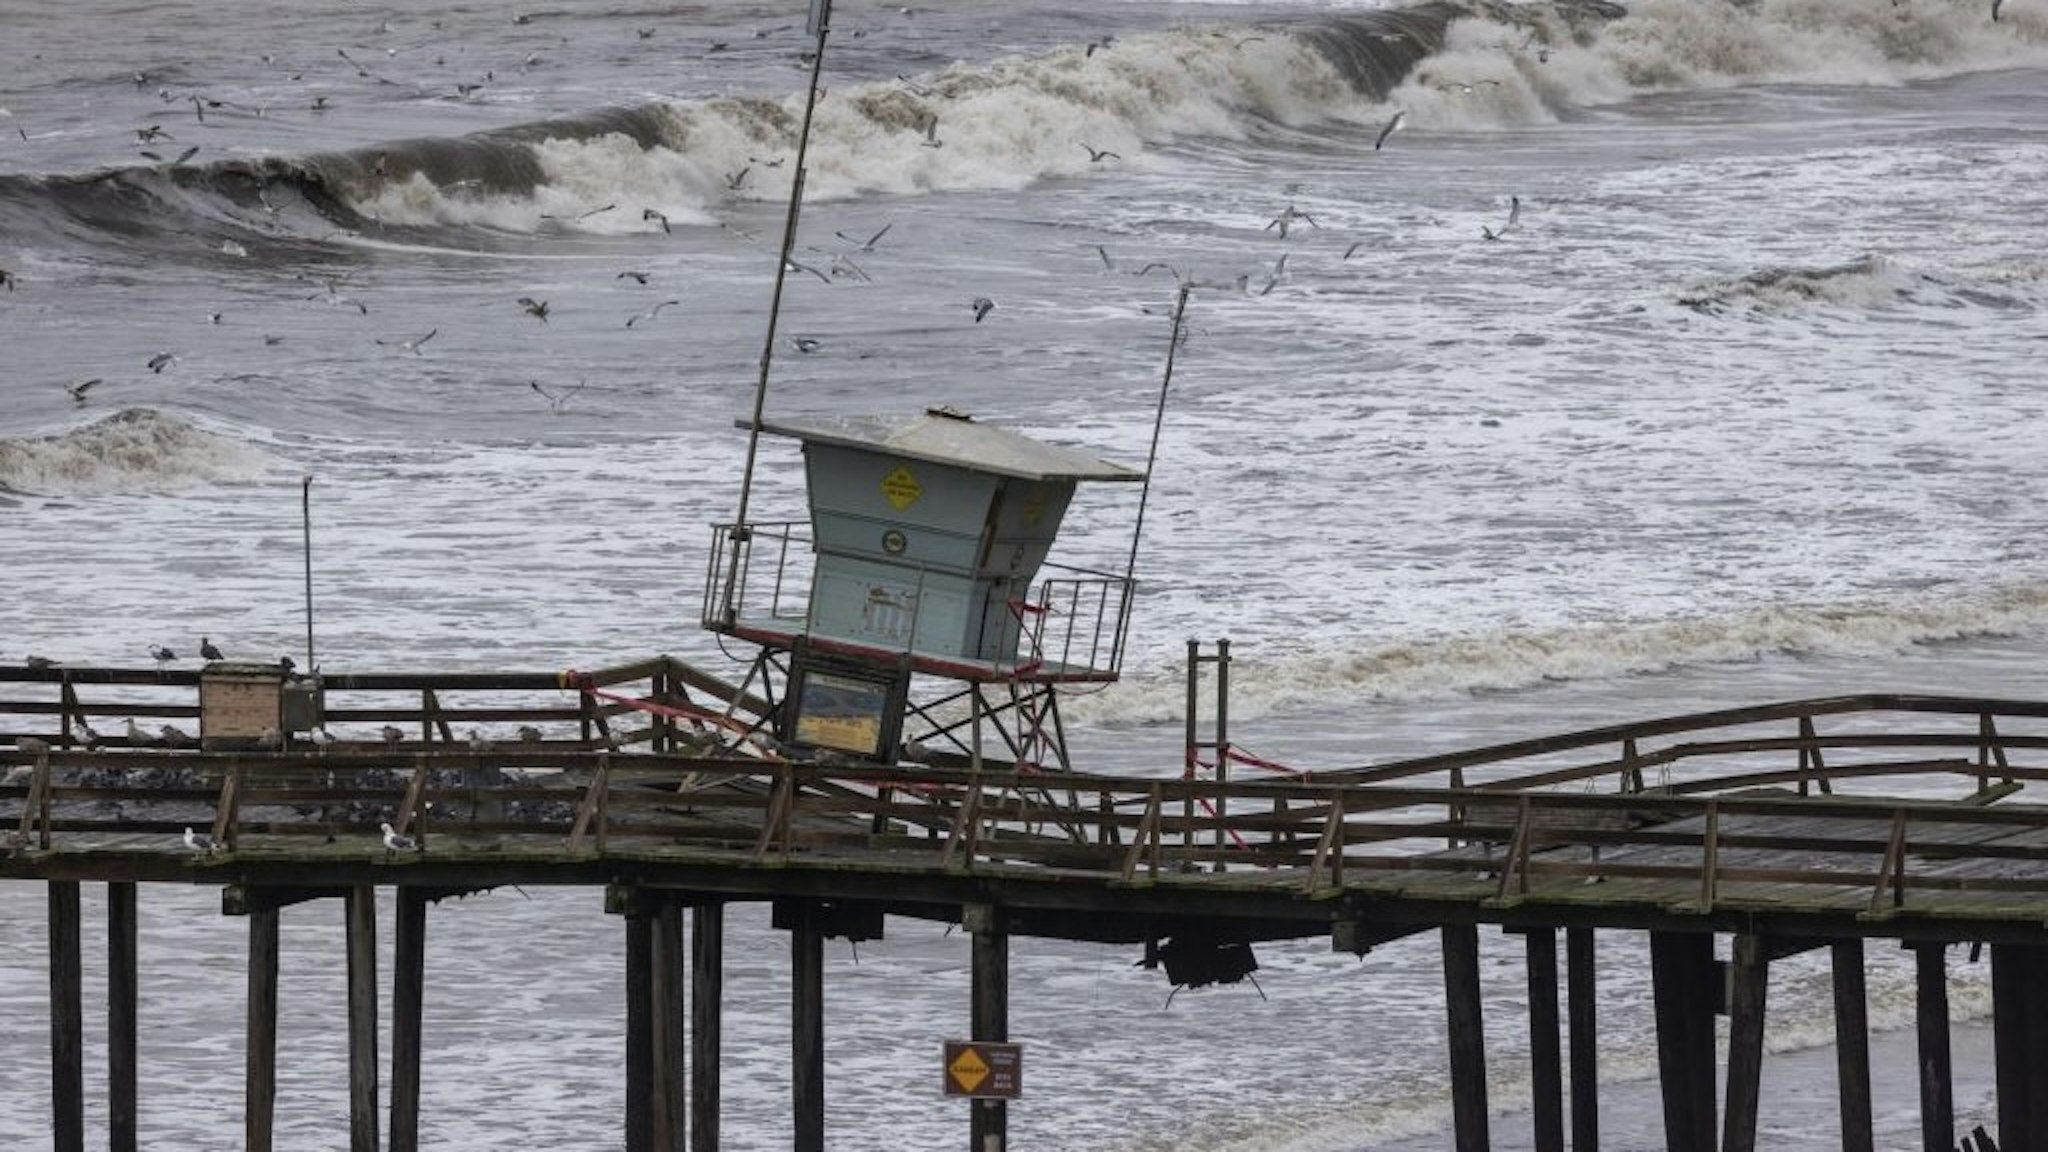 TOPSHOT-US-WEATHER-CALIFORNIA TOPSHOT - This aerial view shows the damaged lifeguard tower on the Seacliff peer after recent storms in Aptos, California, on January 15, 2023. - Soggy Californians on Sunday wearily endured their ninth successive storm in a three-week period that has brought destructive flooding, heavy snowfalls and at least 19 deaths, and forecasters said more of the same loomed for another day. (Photo by DAVID MCNEW / AFP) (Photo by DAVID MCNEW/AFP via Getty Images) DAVID MCNEW / Contributor Photo by DAVID MCNEW / Contributor/AFP / DAVID MCNEW / AFP via Getty Images